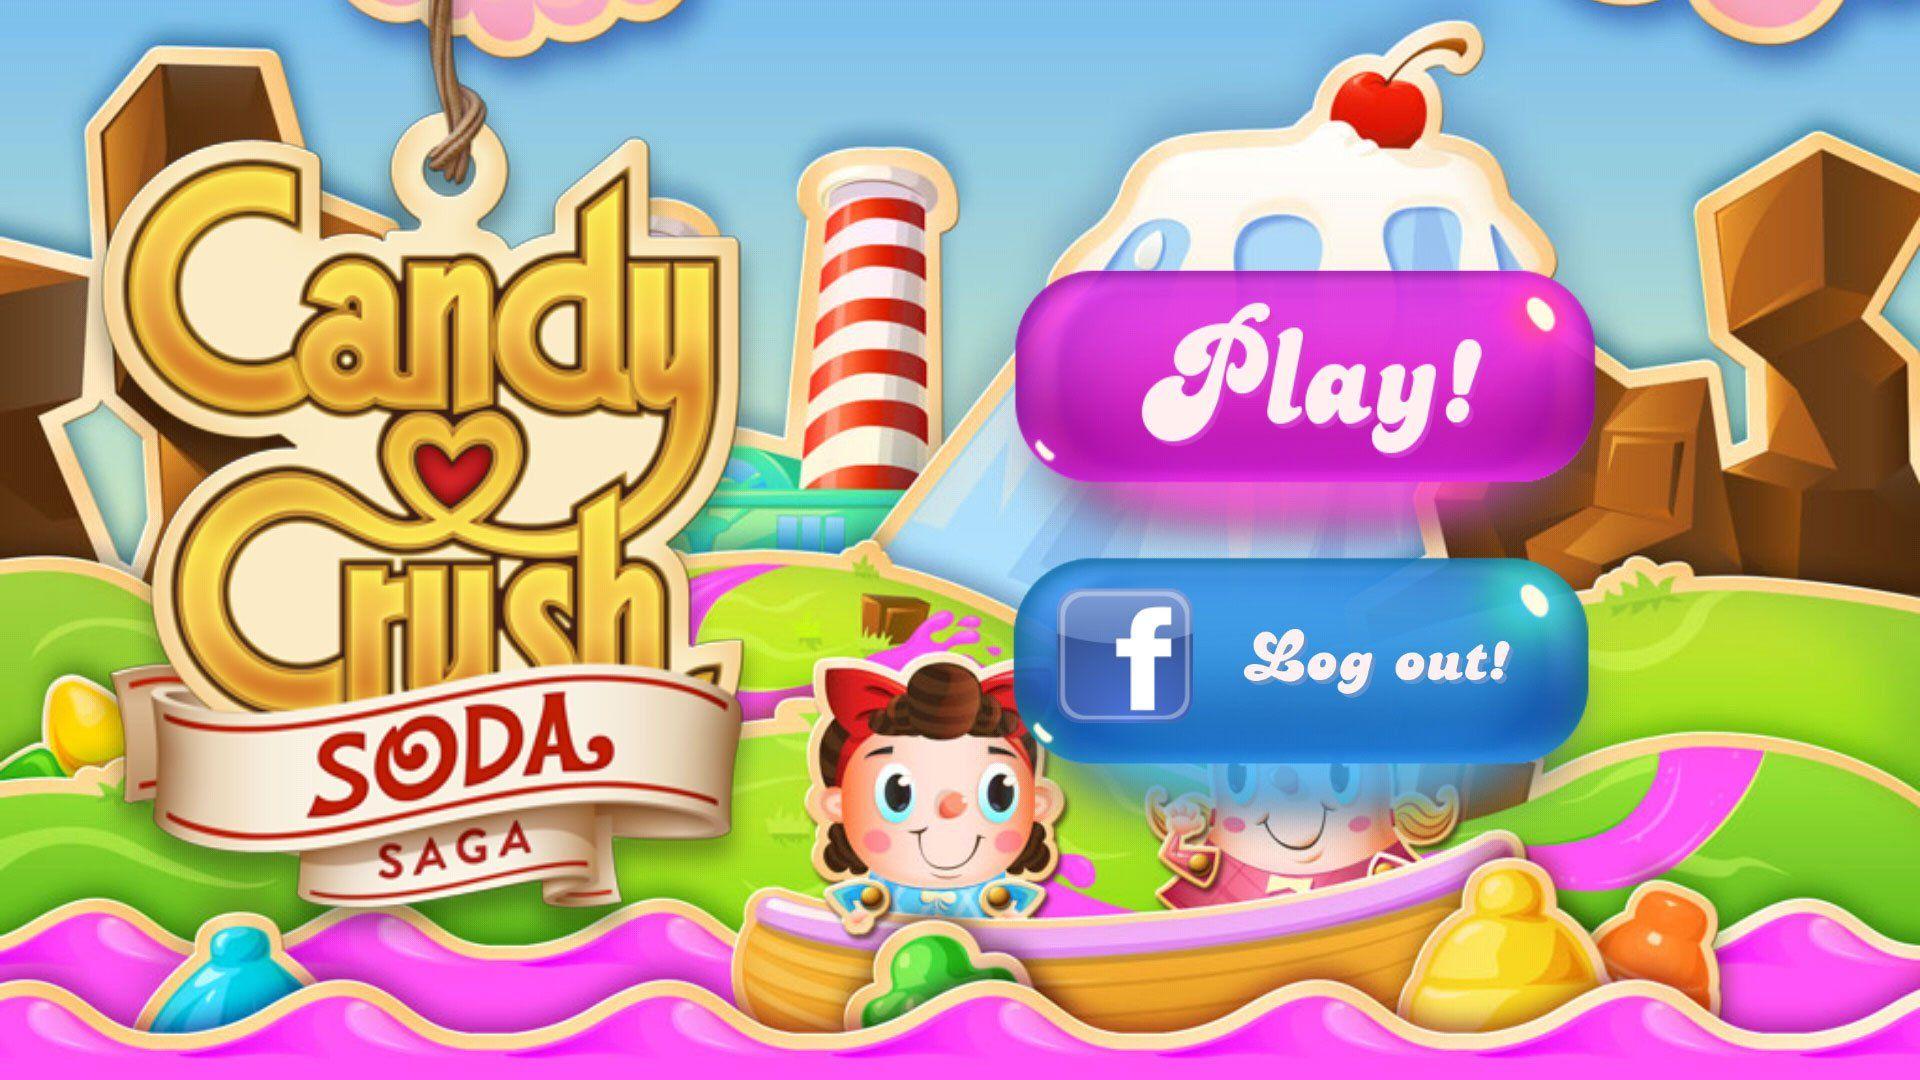 CANDY CRUSH SAGA match online puzzle family wallpapers.